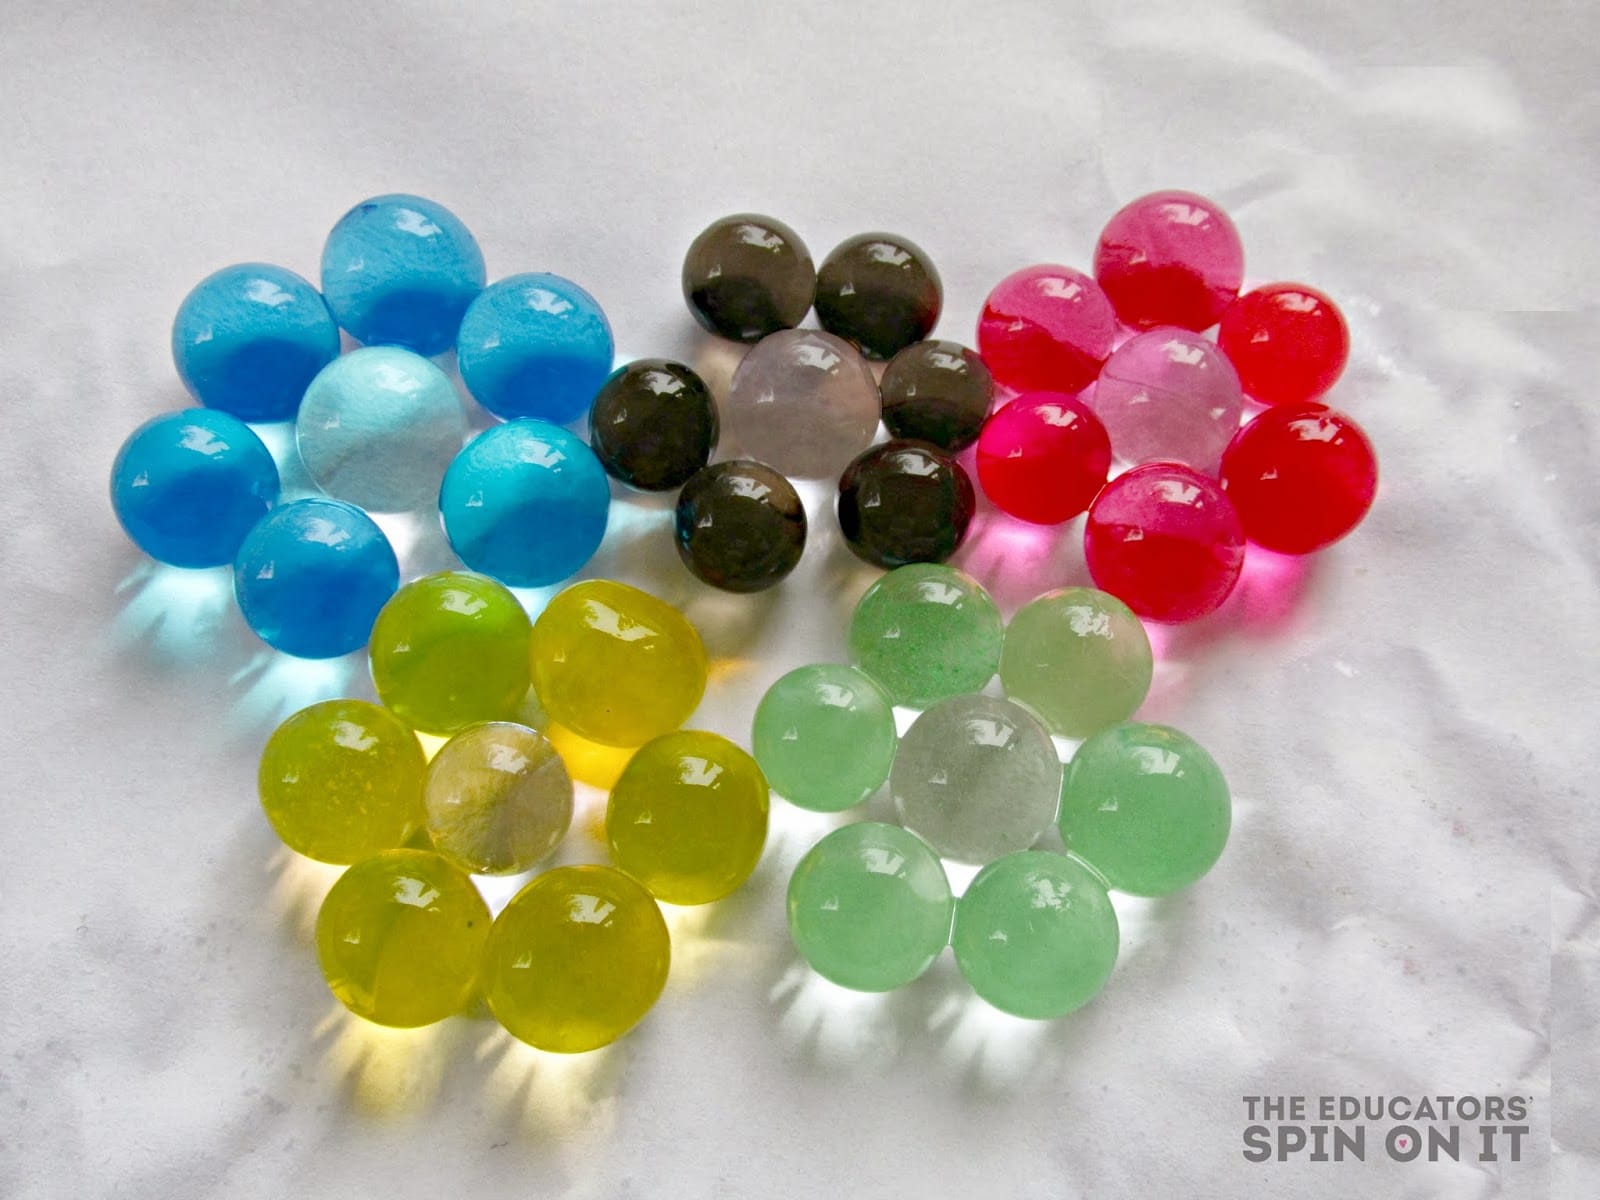 Make the olympic rings with water beads with your child
